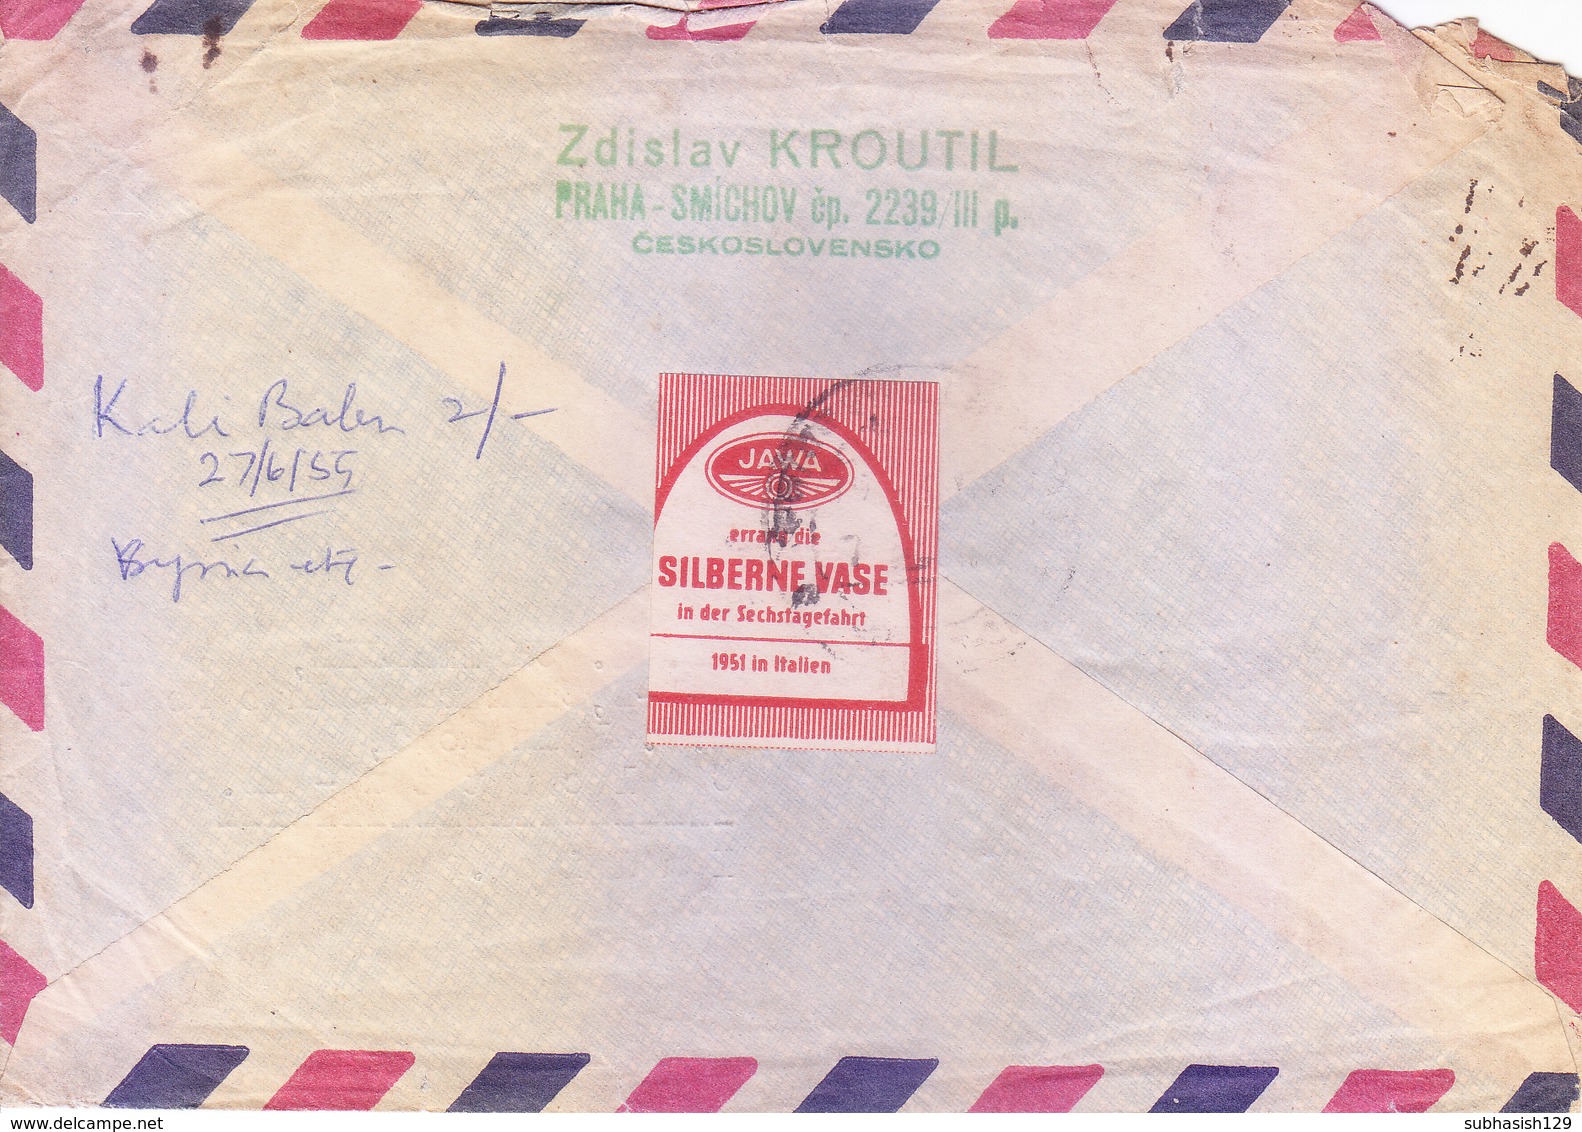 CZECHOSLOVAKIA : 1959 COMMERCIAL COVER POSTED FOR INDIA : USE OF ADVERTISEMENT LABEL ON BACK - SILBERNE VASE - Covers & Documents